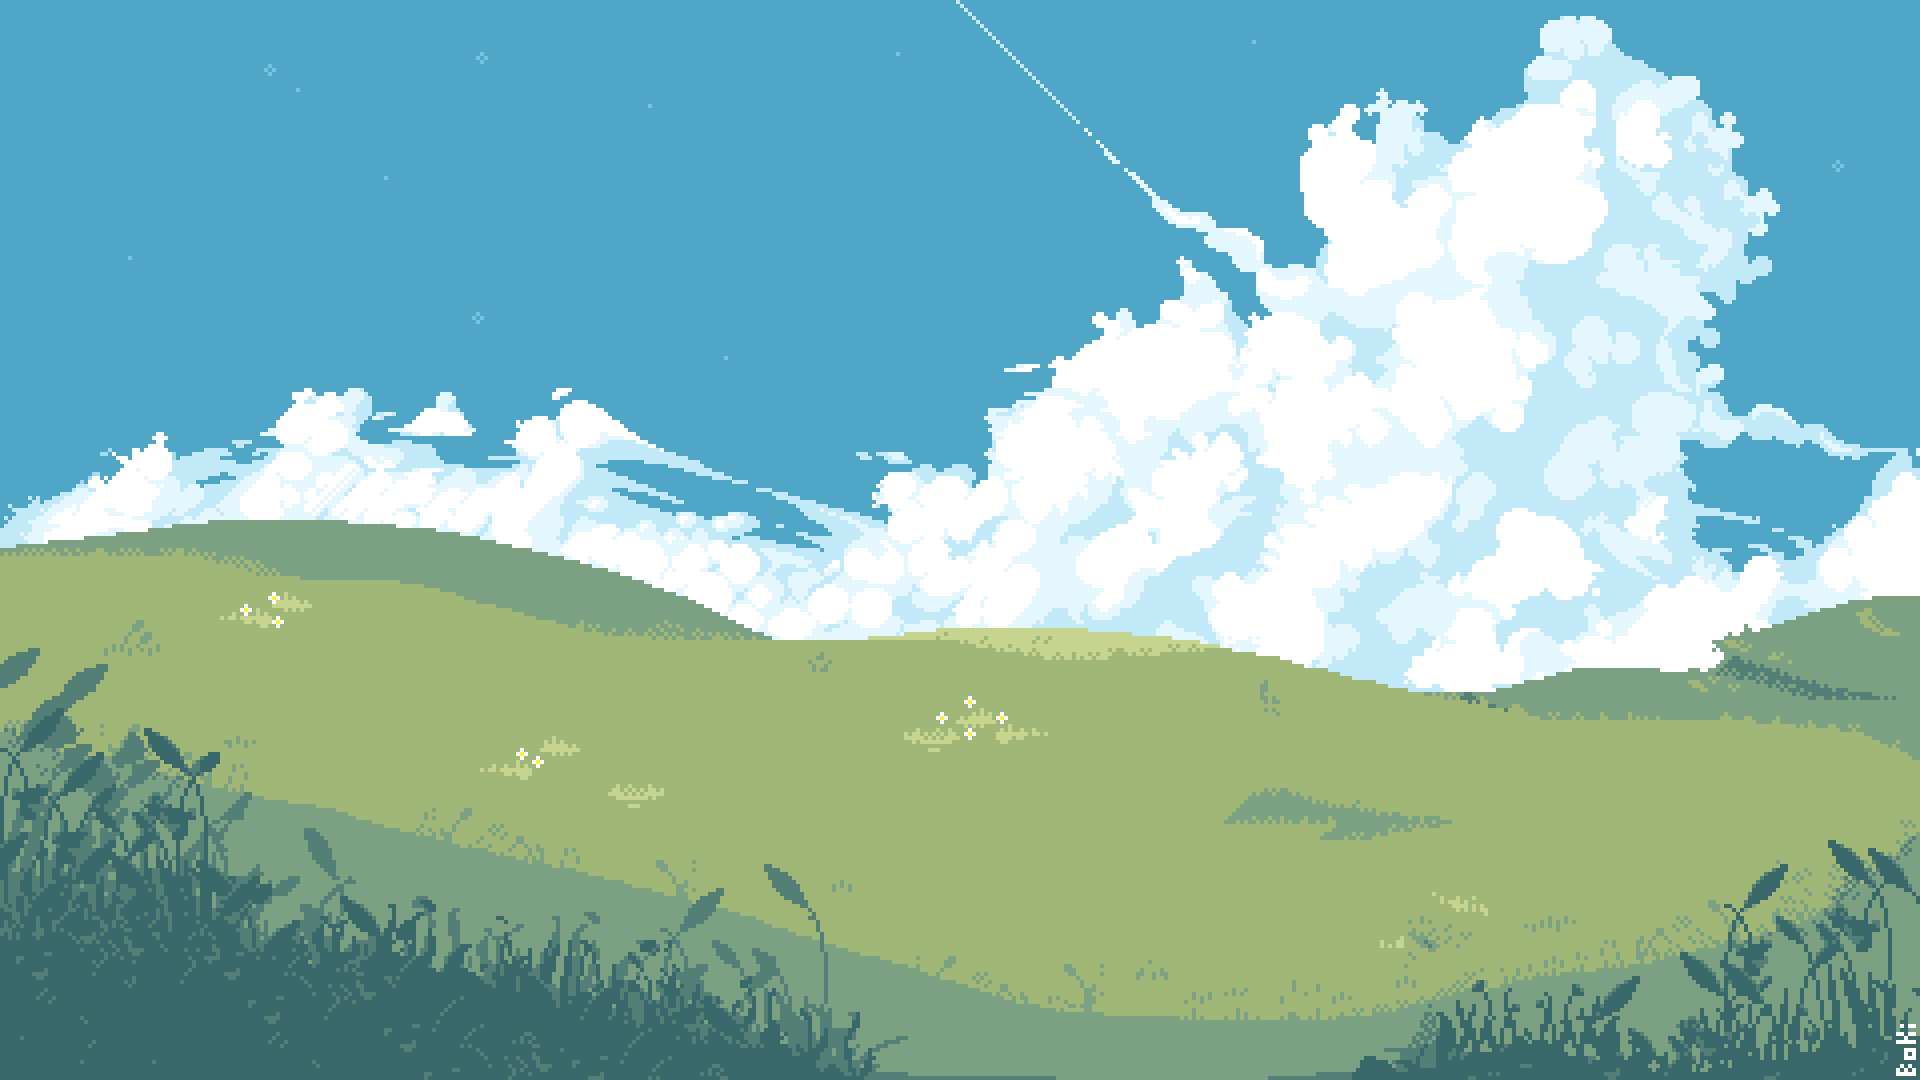 Pixel art of a landscape by BokiBokiPixelArt, used without permission by Epic Hero Battles.